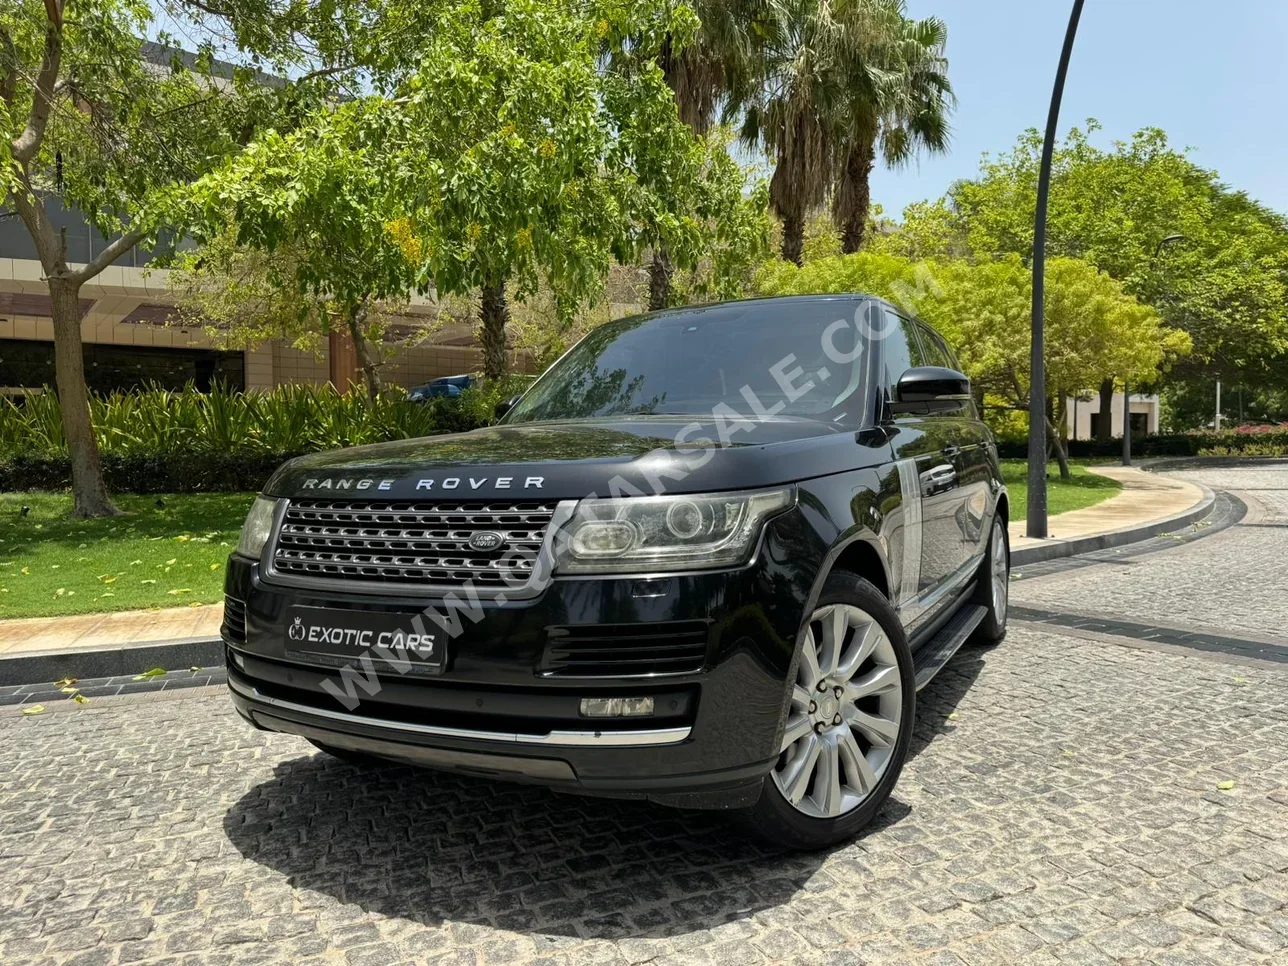 Land Rover  Range Rover  Vogue HSE  2015  Automatic  105,000 Km  8 Cylinder  Four Wheel Drive (4WD)  SUV  Black